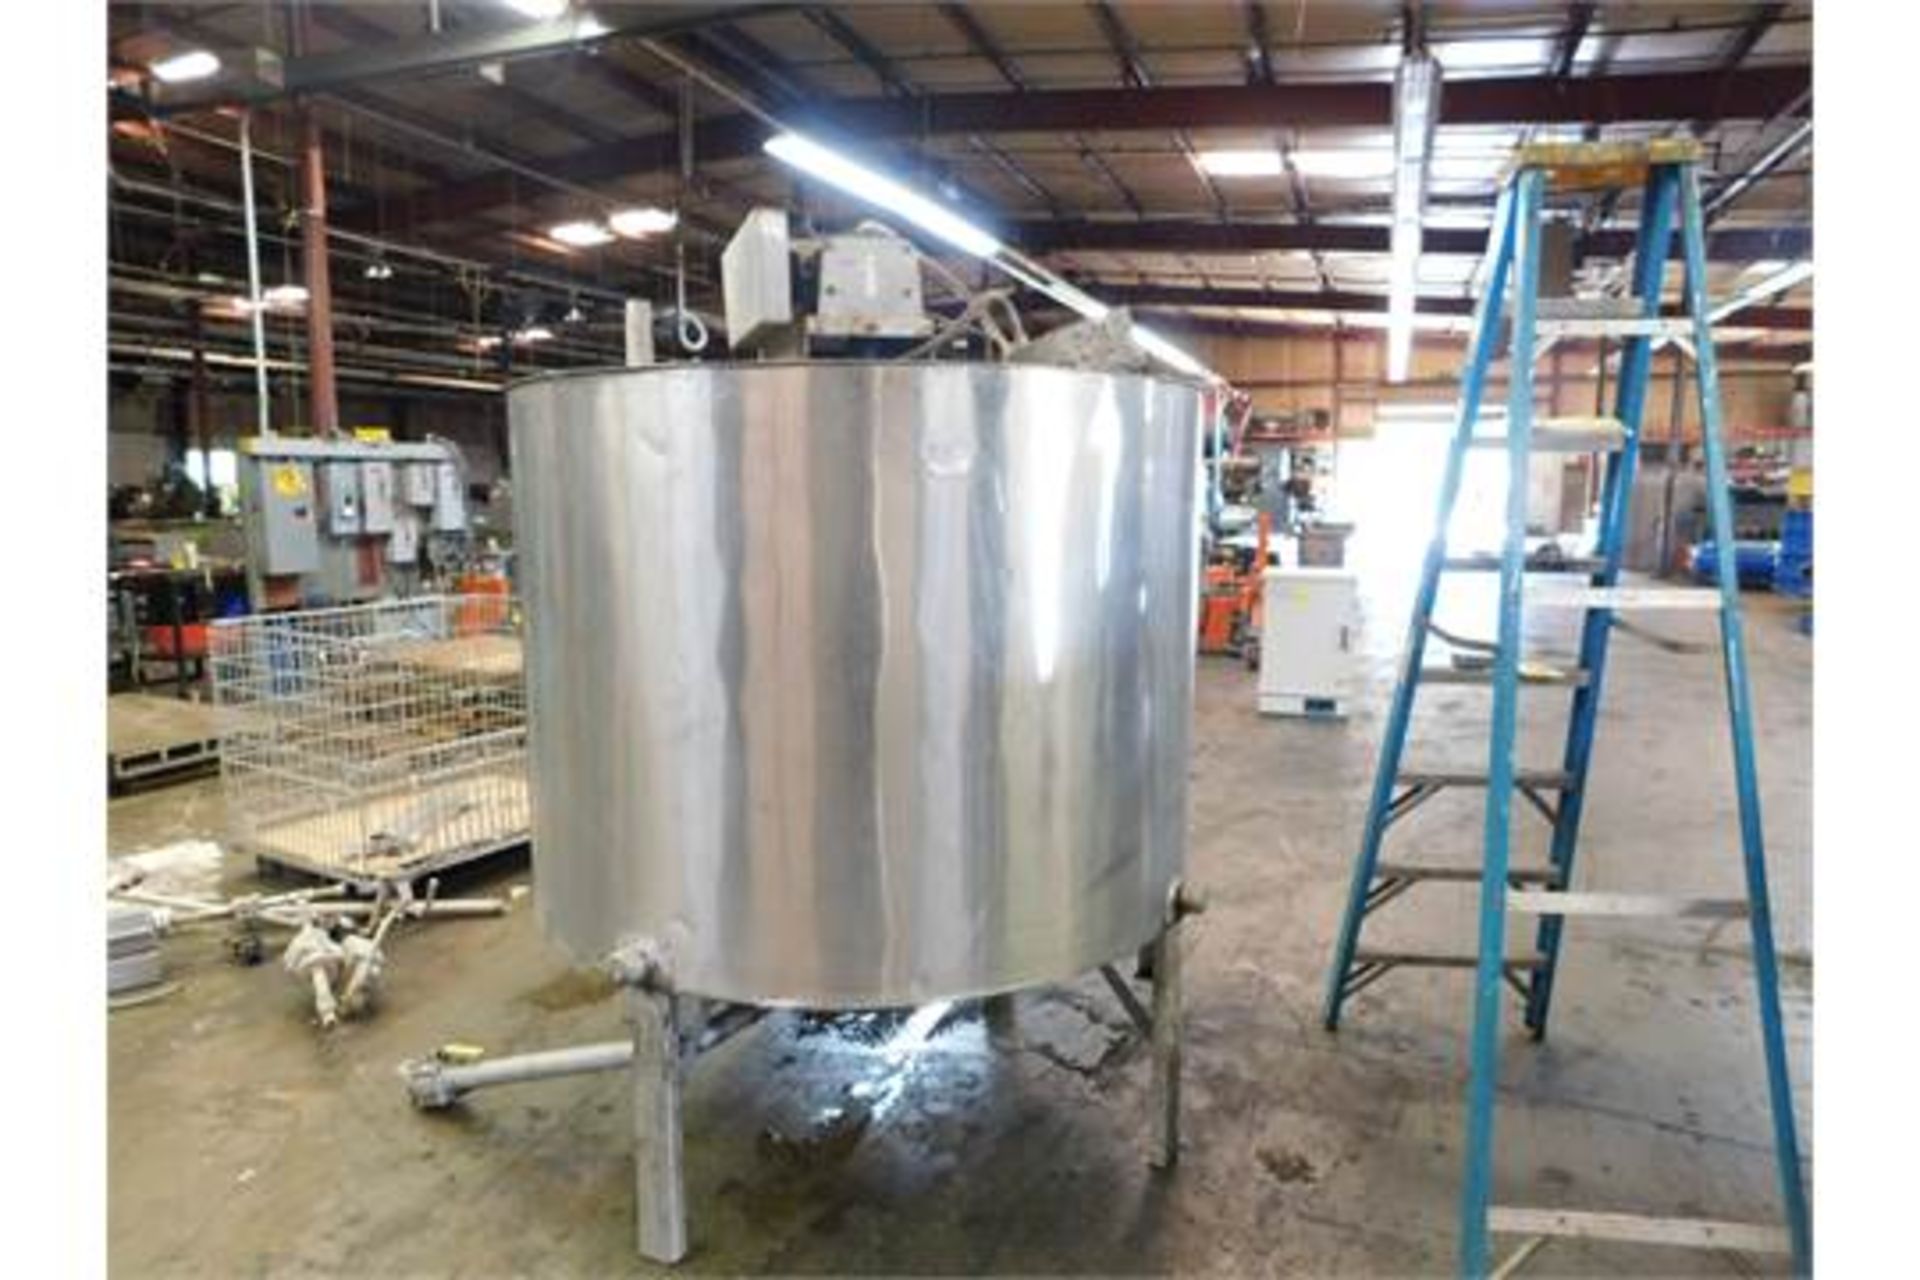 Stainless Steel Tank, 66.25 inches Diameter, 48.25 inches Height, Agitator/Mixer, Discharge Bottom - Image 3 of 3